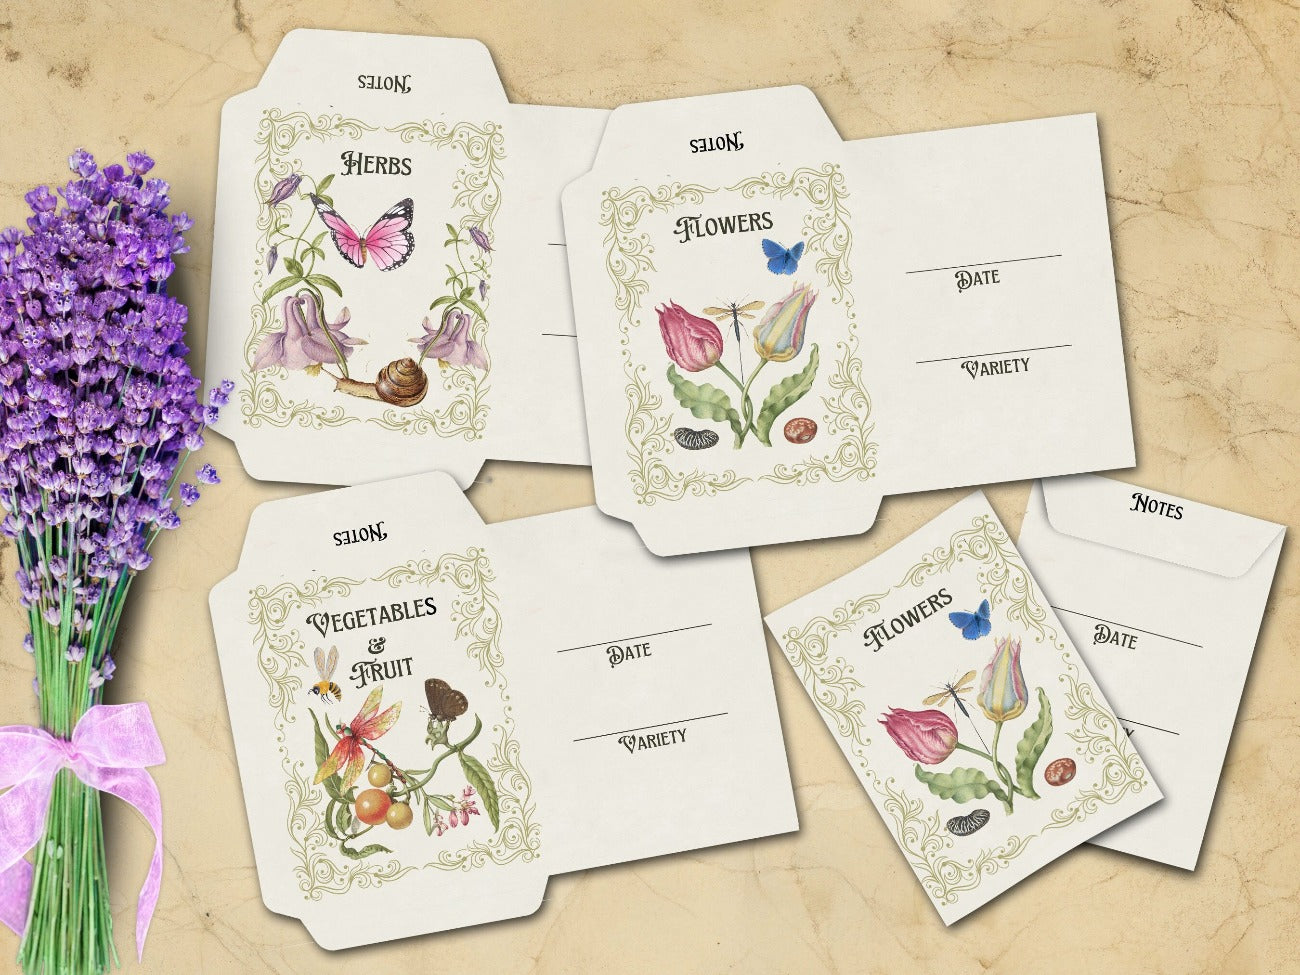 Three printable Green Witch seed packages include one each for herbs, flowers, vegetables, and fruits. Packages have fancy scroll borders, flowers, butterflies and fruits- Morgana Magick Spell